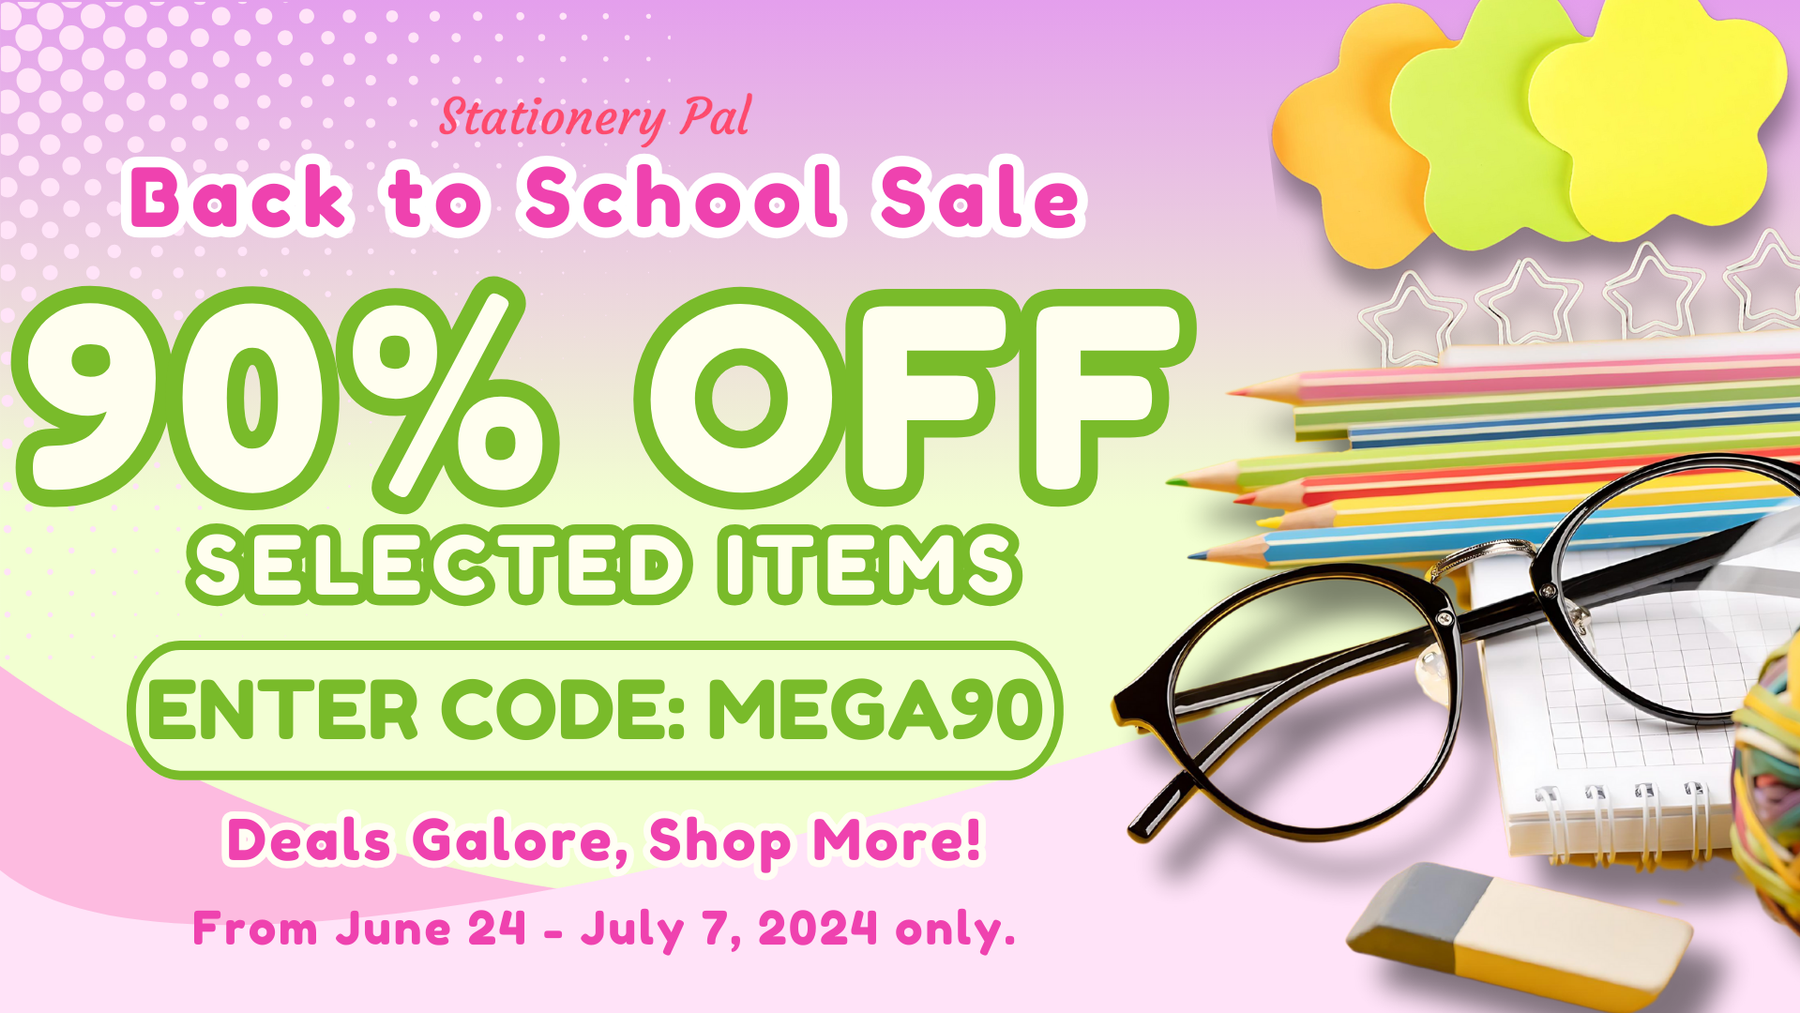 🎈 Back to School: 90% Off Select Items! 🎈